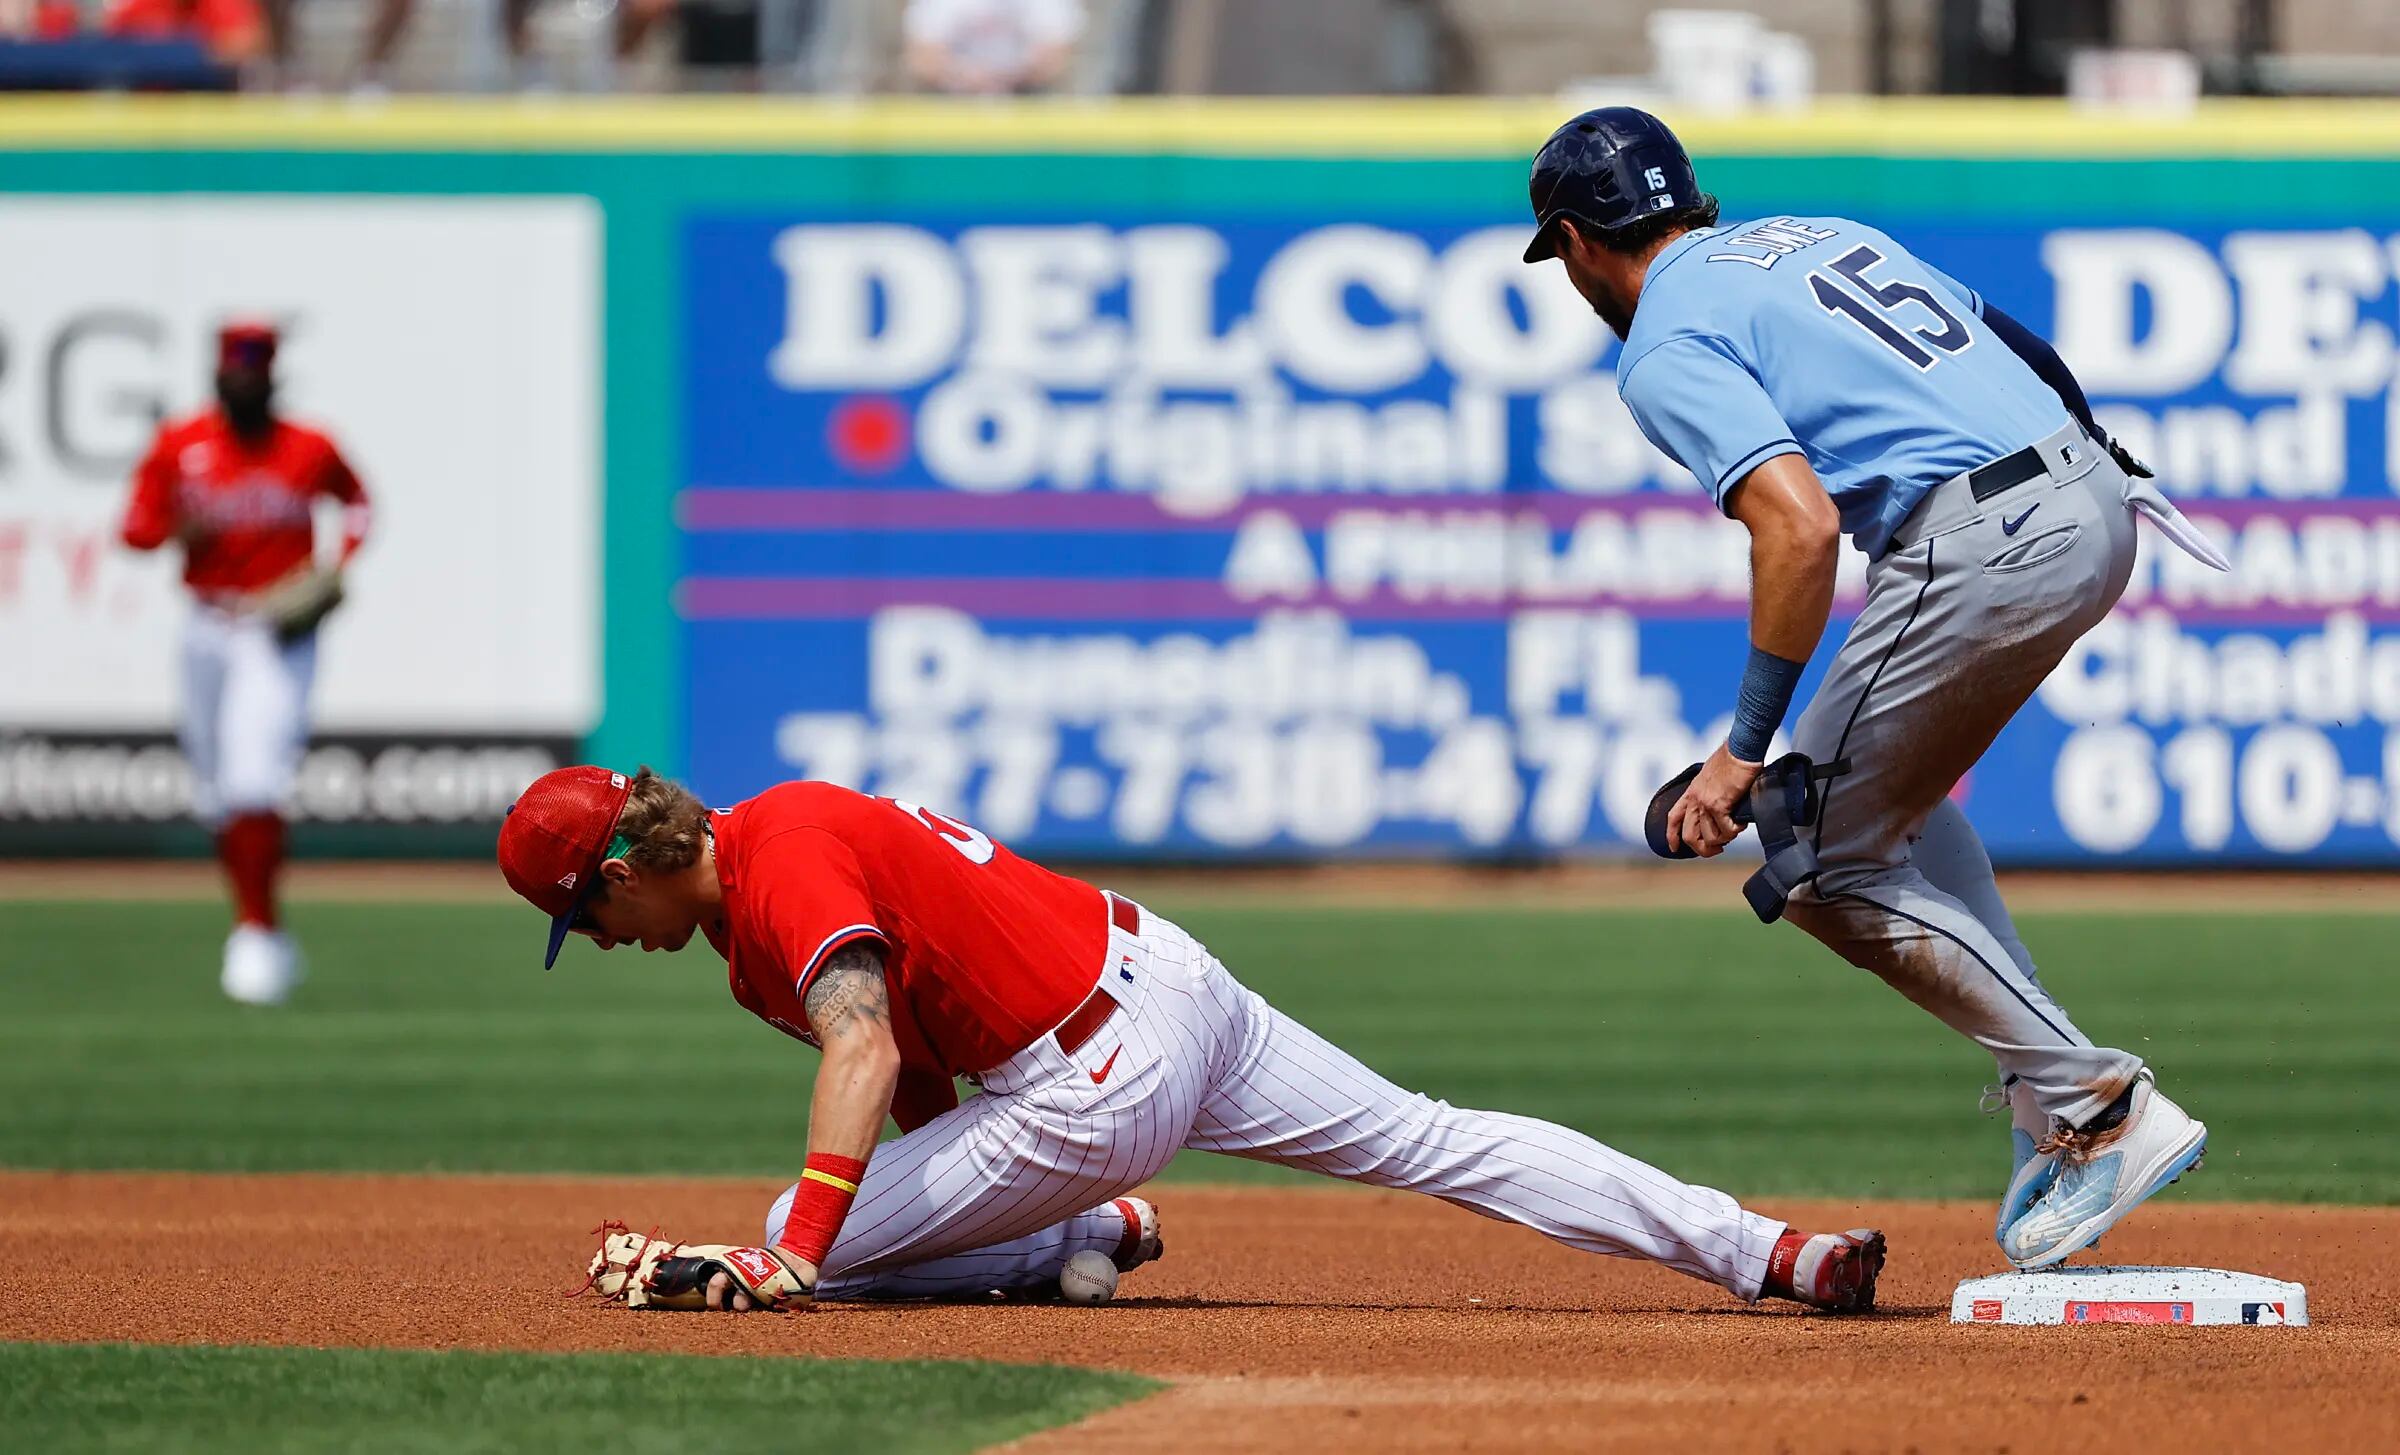 Photos from the Phillies spring training loss to the Rays